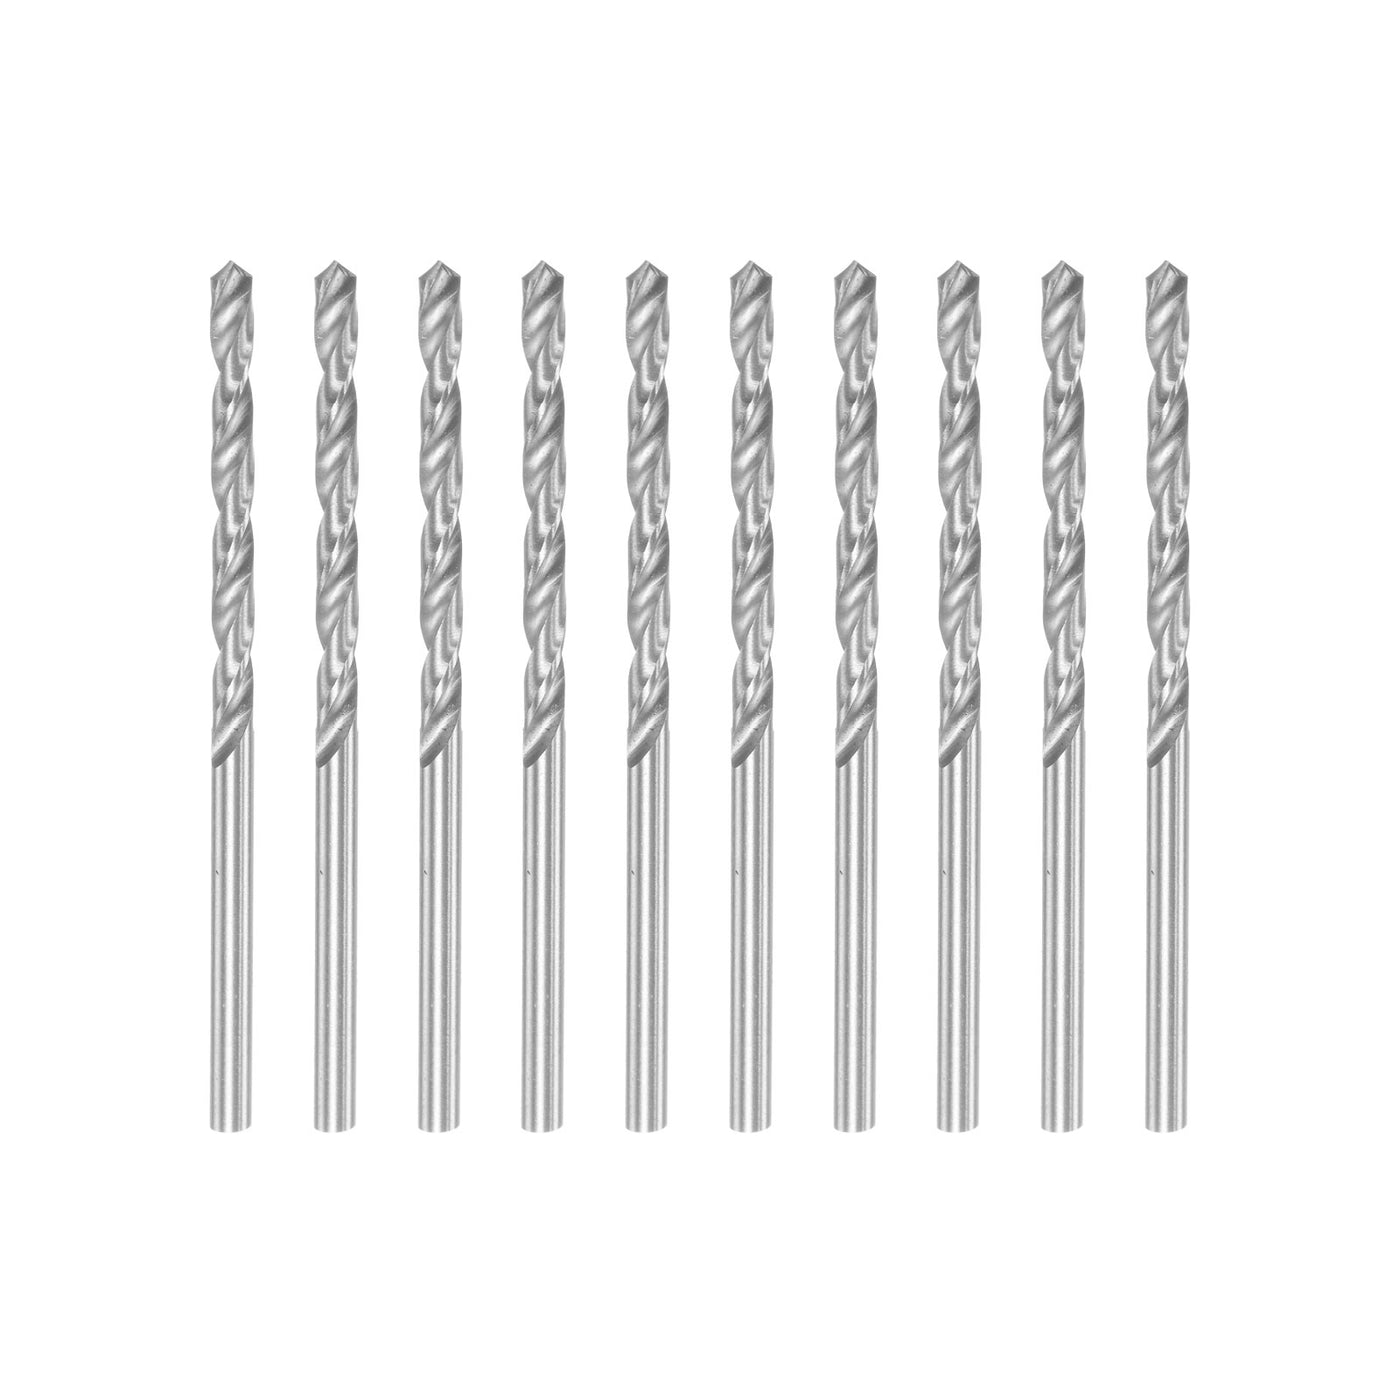 uxcell Uxcell 10 Pcs 2.9mm High Speed Steel Drill Bits, Fully Ground 60mm Length Drill Bit